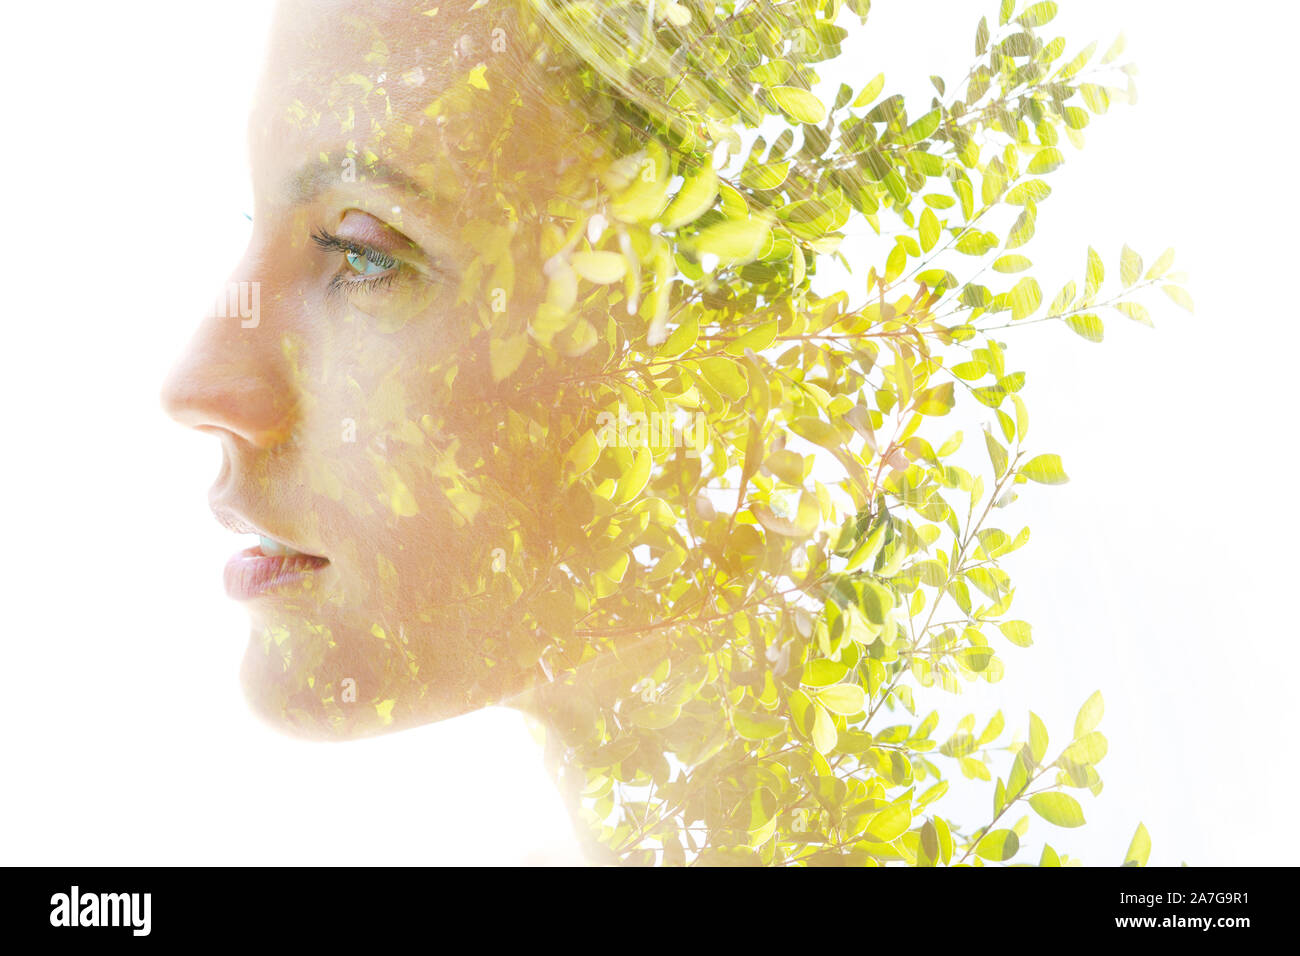 Double exposure woman's portrait with an ecological concept showcasing the beautiful feminine nature of plants Stock Photo Alamy